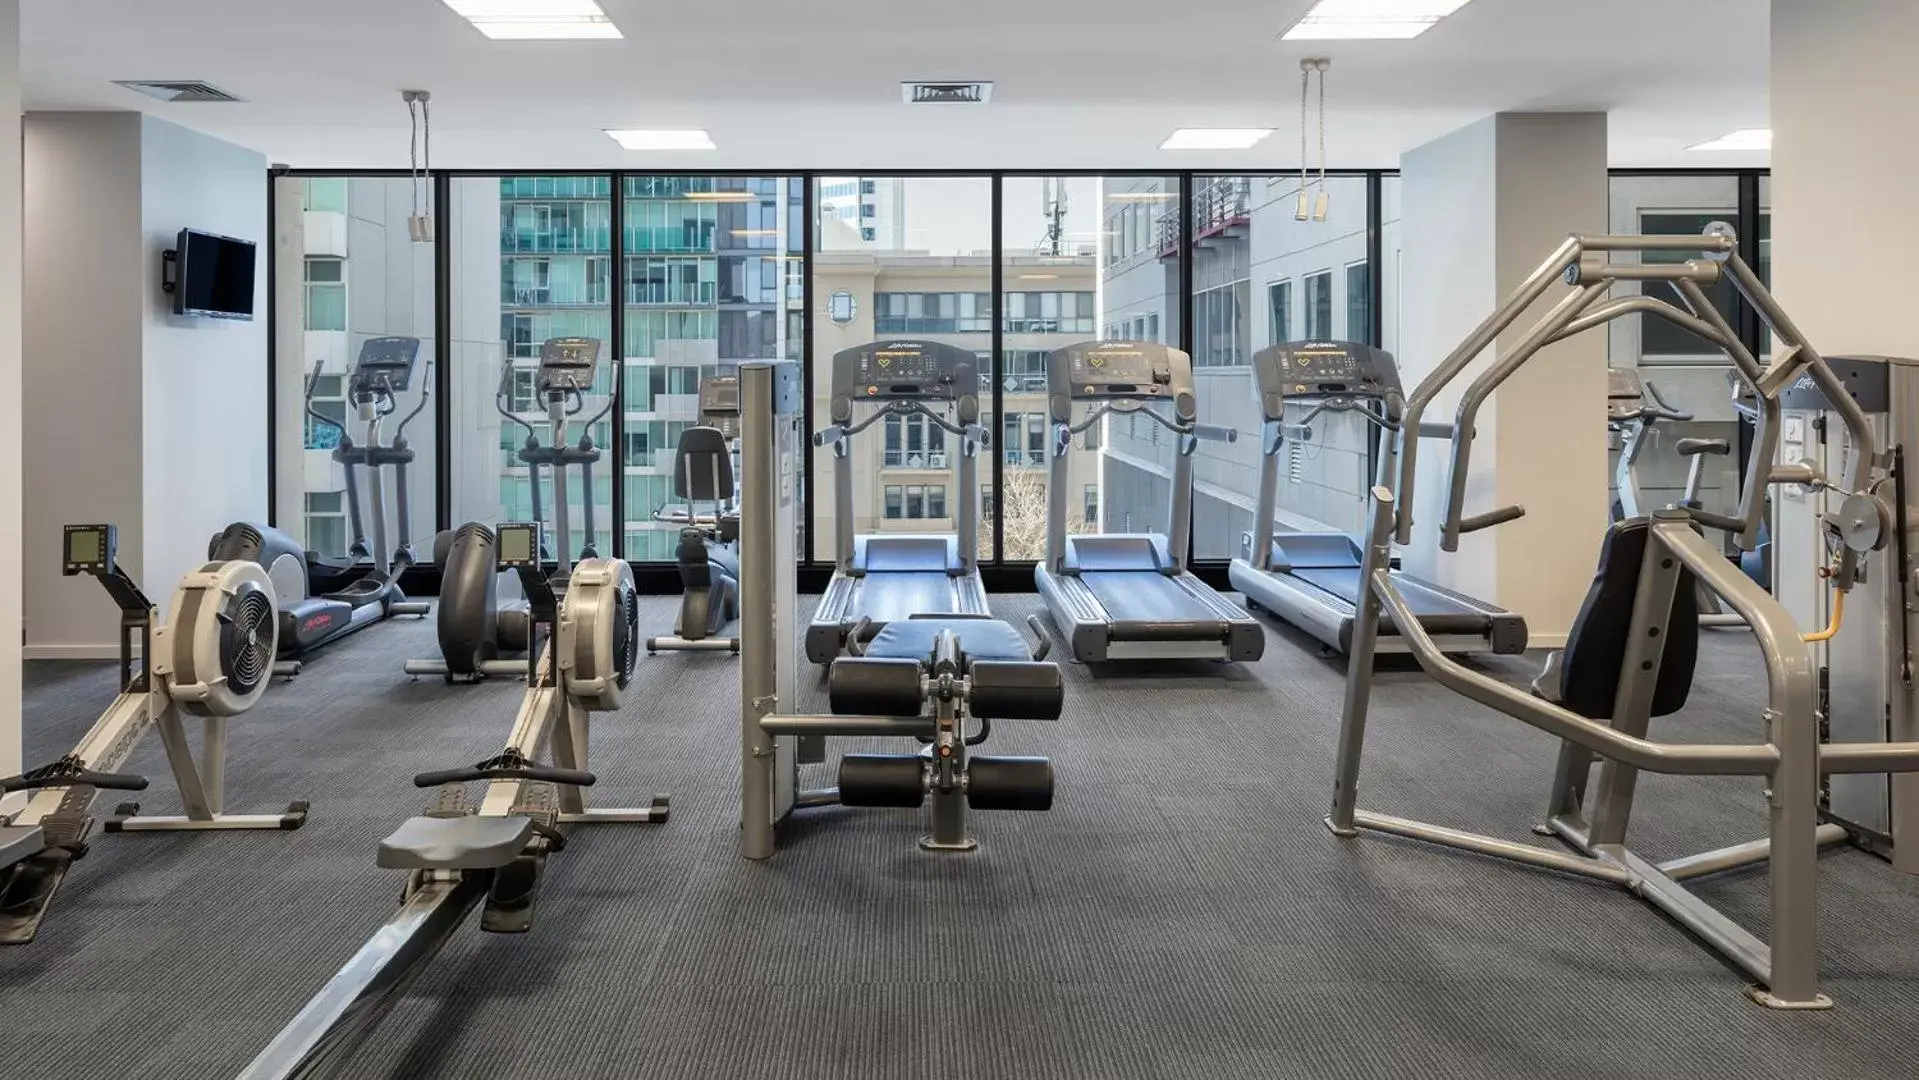 Fitness centre/facilities, Fitness Center/Facilities in Oaks Melbourne on William Suites